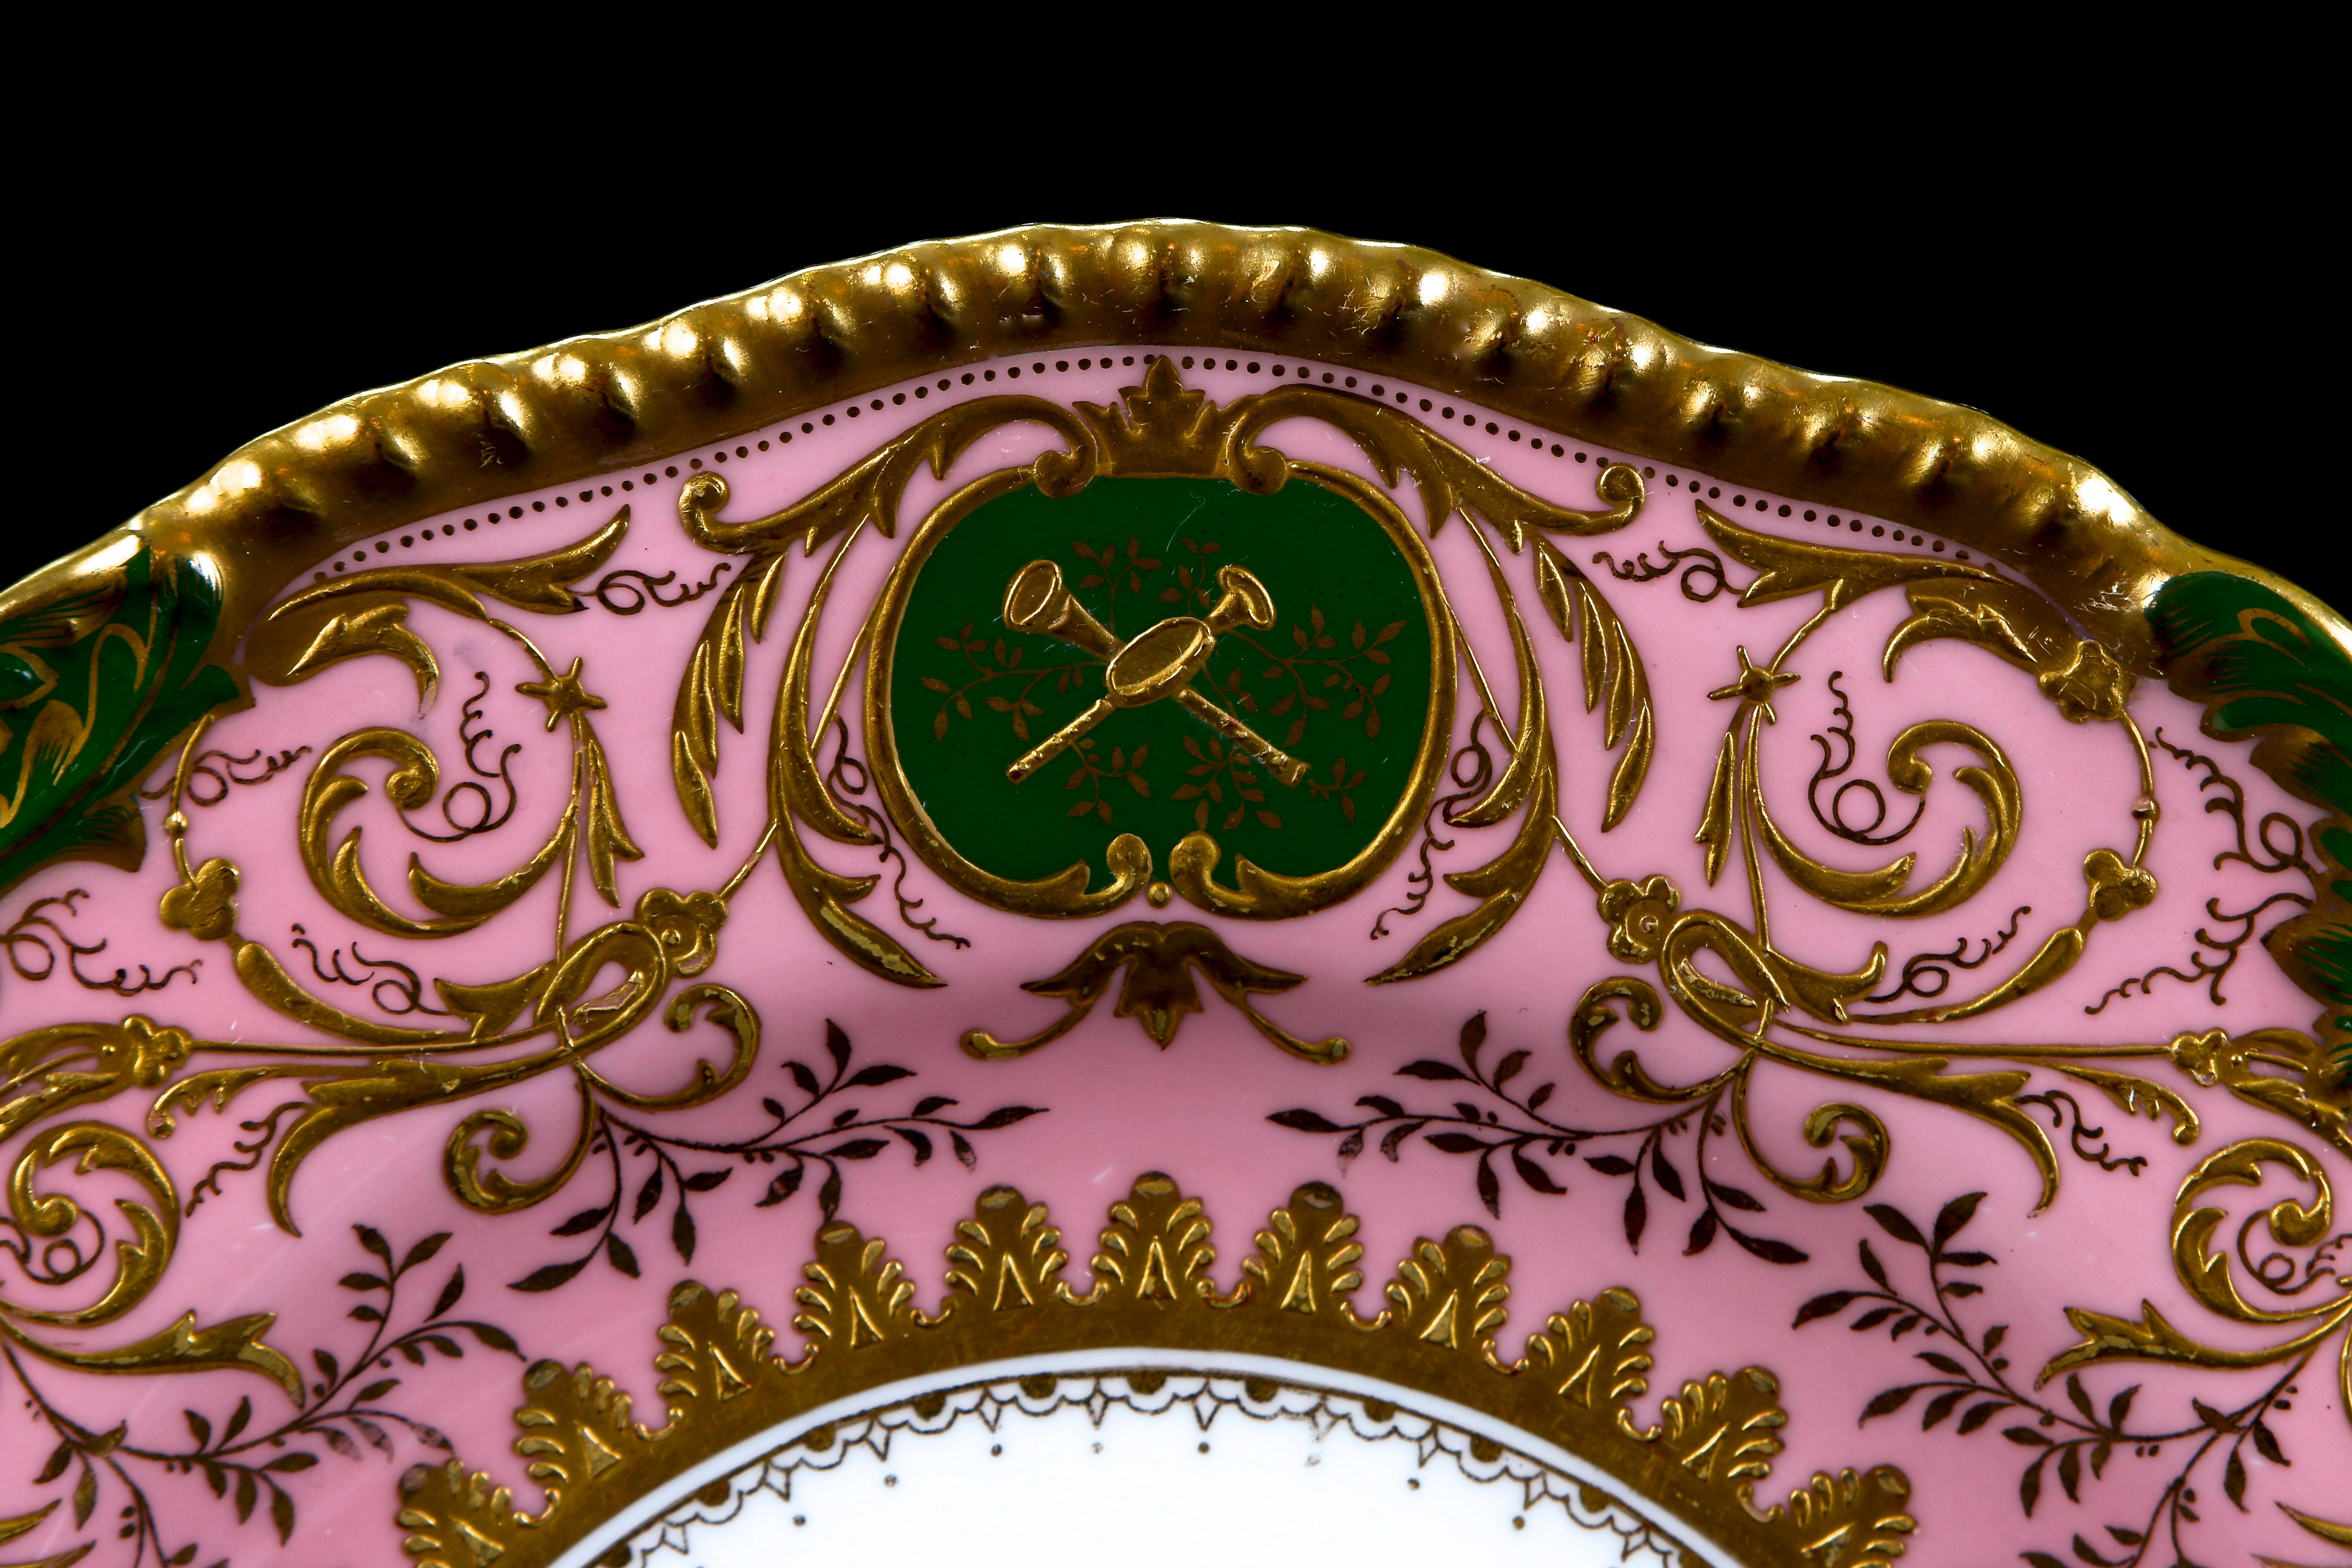 These 19th century plates from Coalport, England feature pink ground with an elaborate scrolling foliate gilded design, accented by 3 cartouches or inserts of musical instruments on a green background. The gilding on these plates is thick and